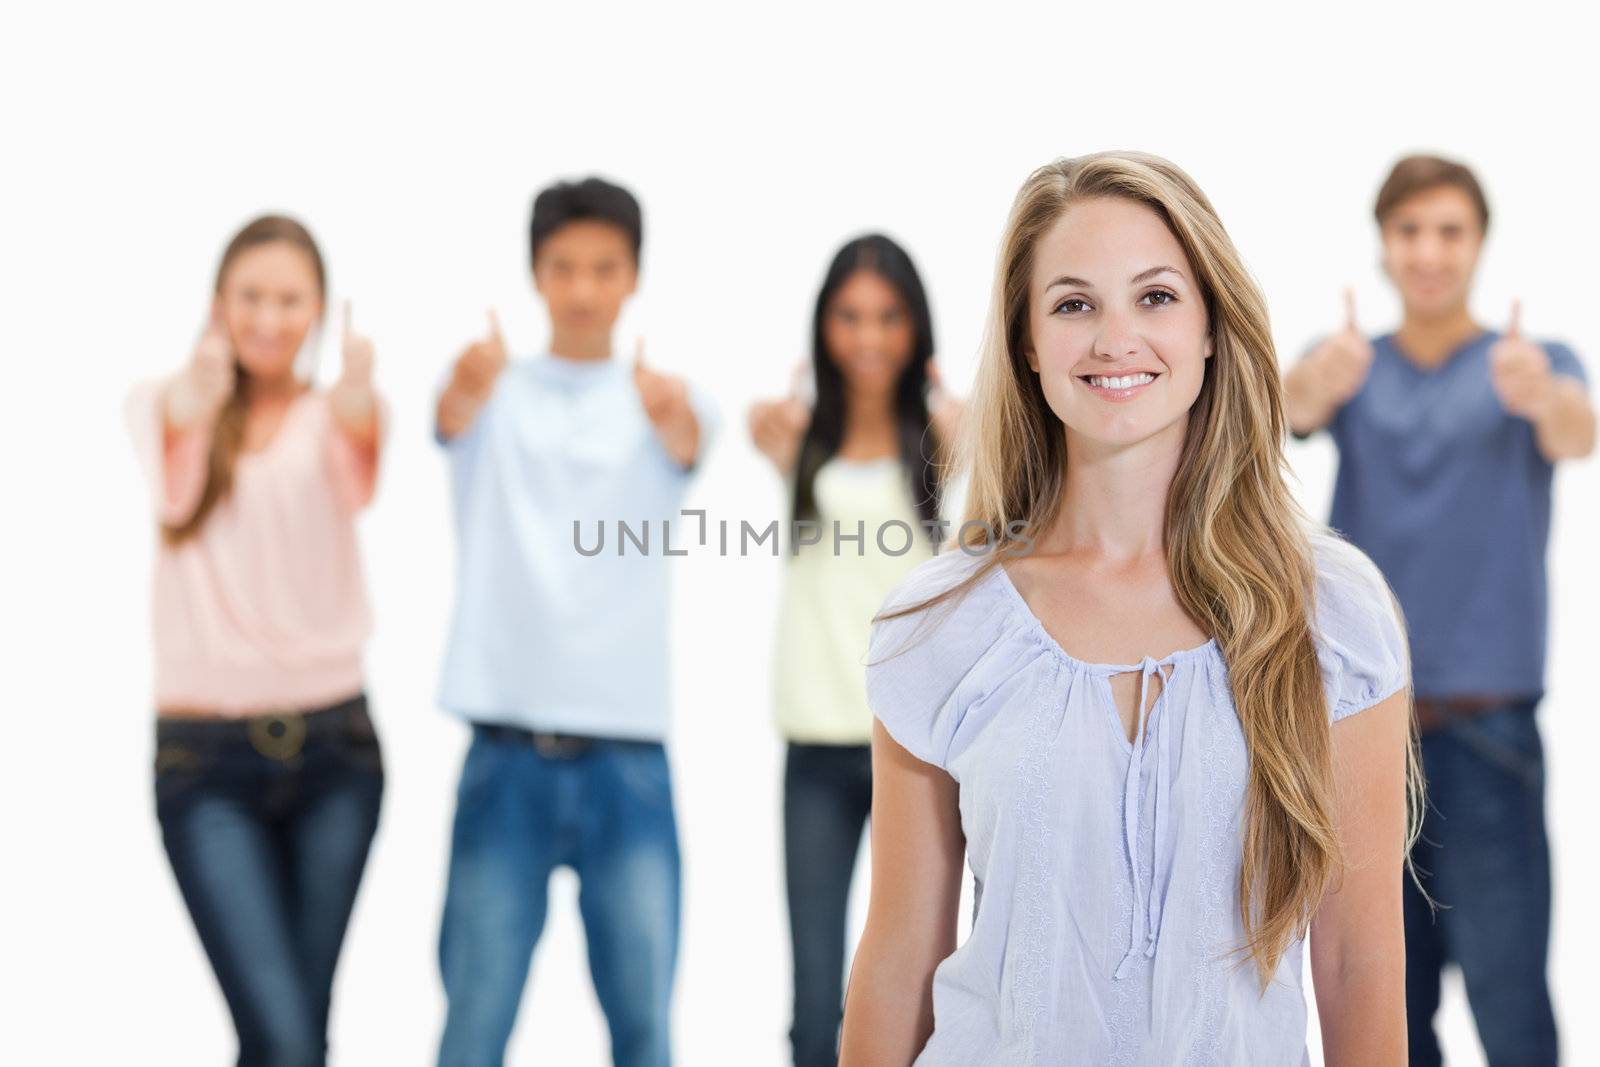 Close-up of woman smiling with people approving behind her by Wavebreakmedia